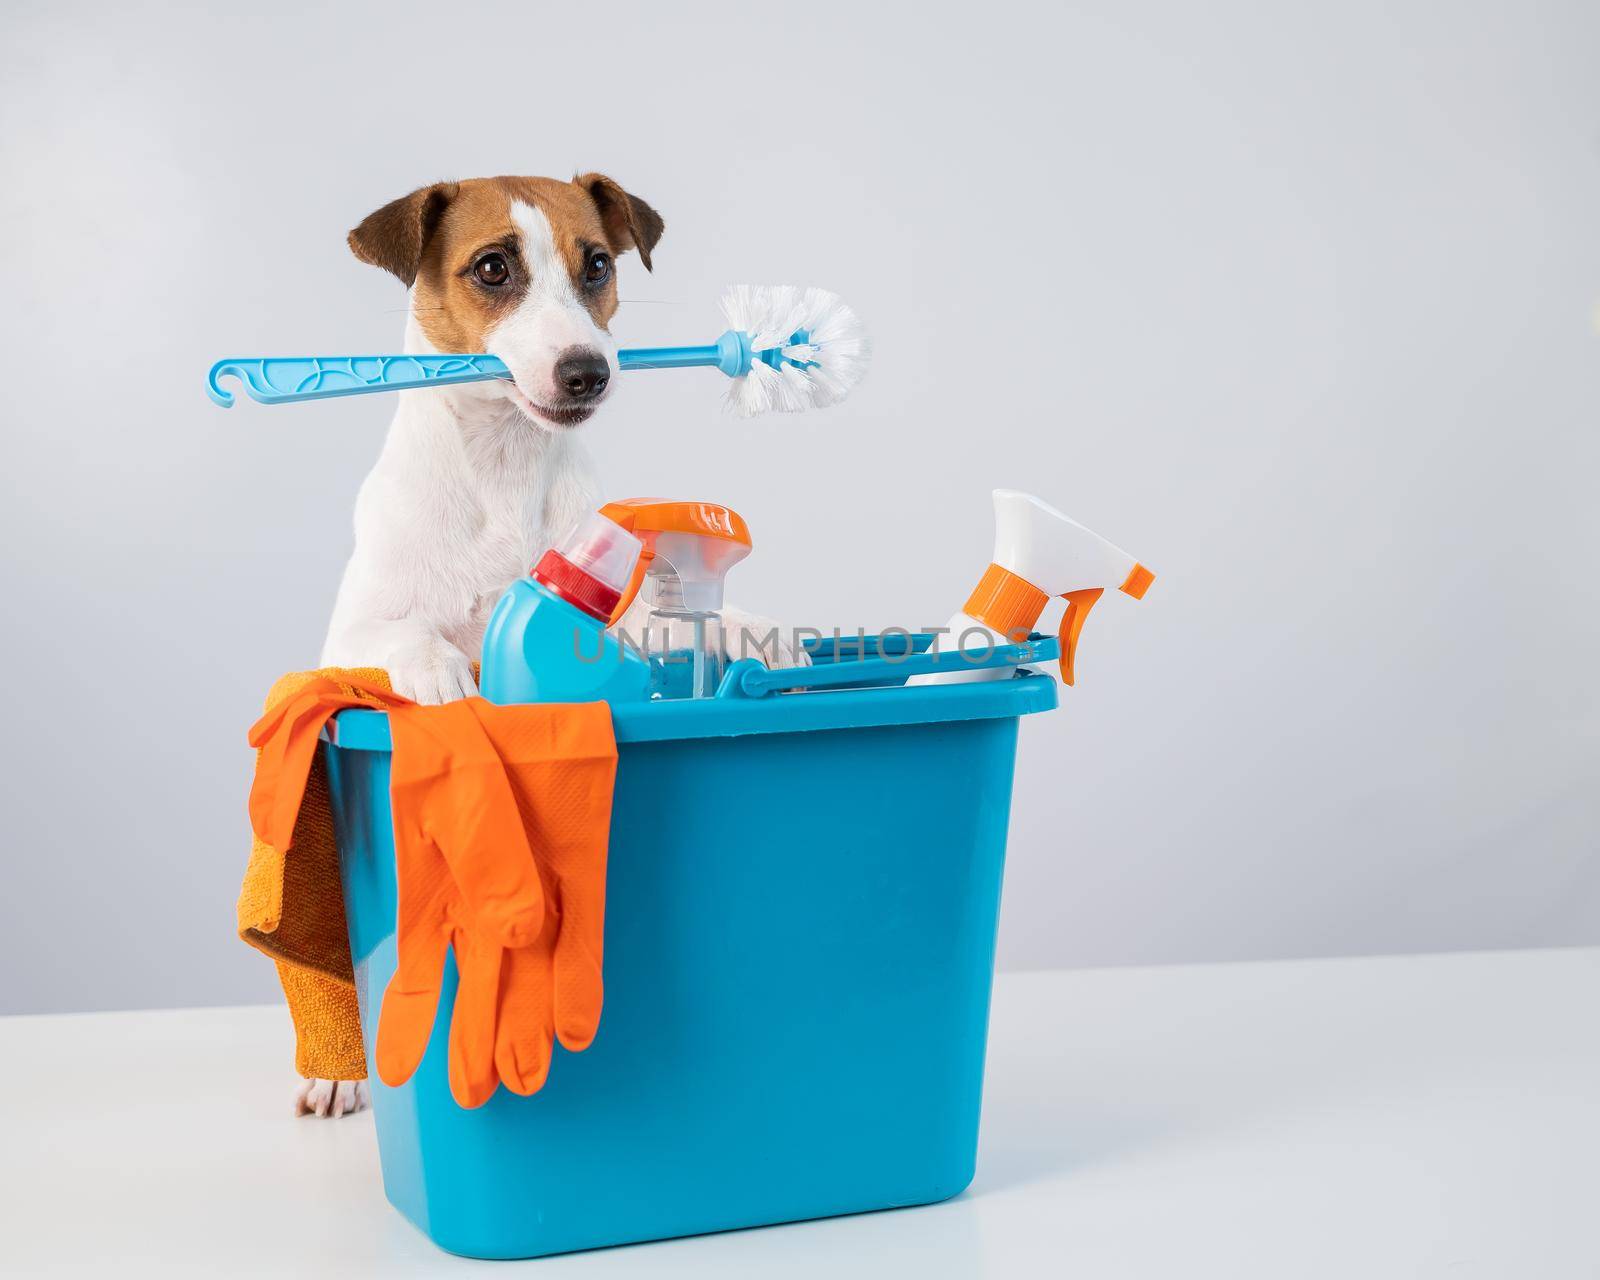 Cleaning products in a bucket and a dog holding a toilet brush on a white background. by mrwed54